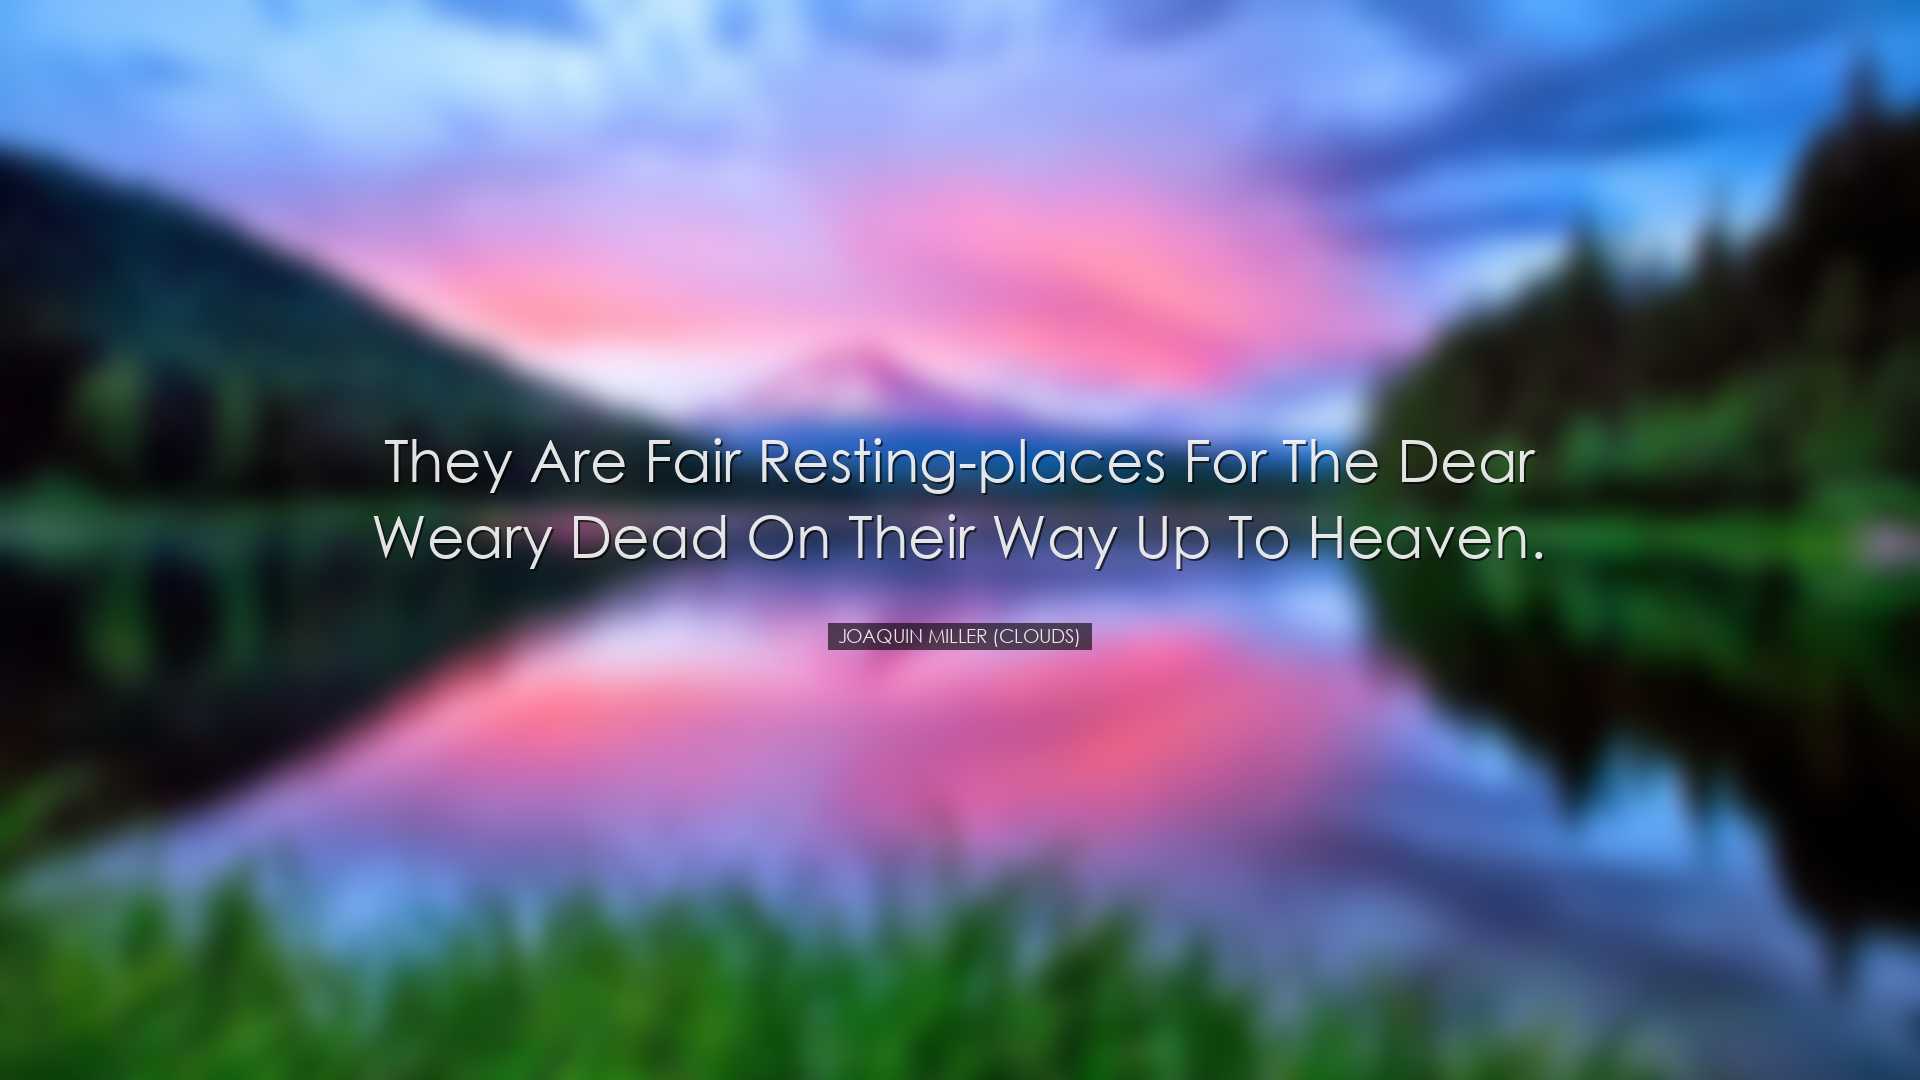 They are fair resting-places for the dear weary dead on their way